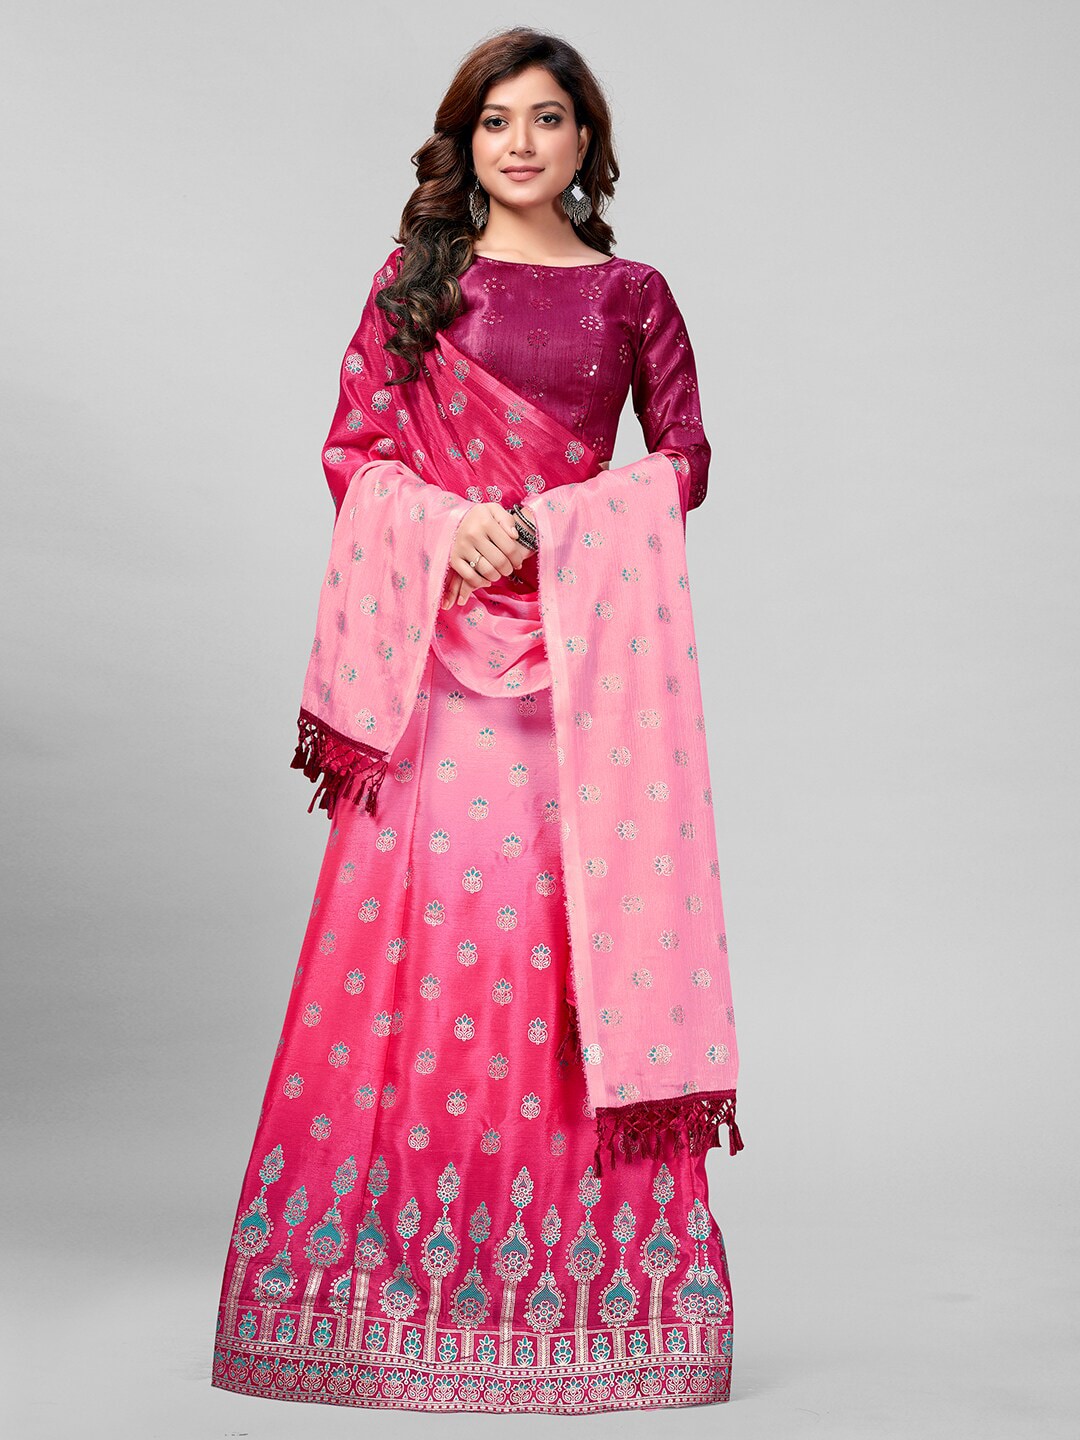 Mitera Peach-Coloured & Silver-Toned Embroidered Semi-Stitched Lehenga & Unstitched Blouse With Dupatta Price in India